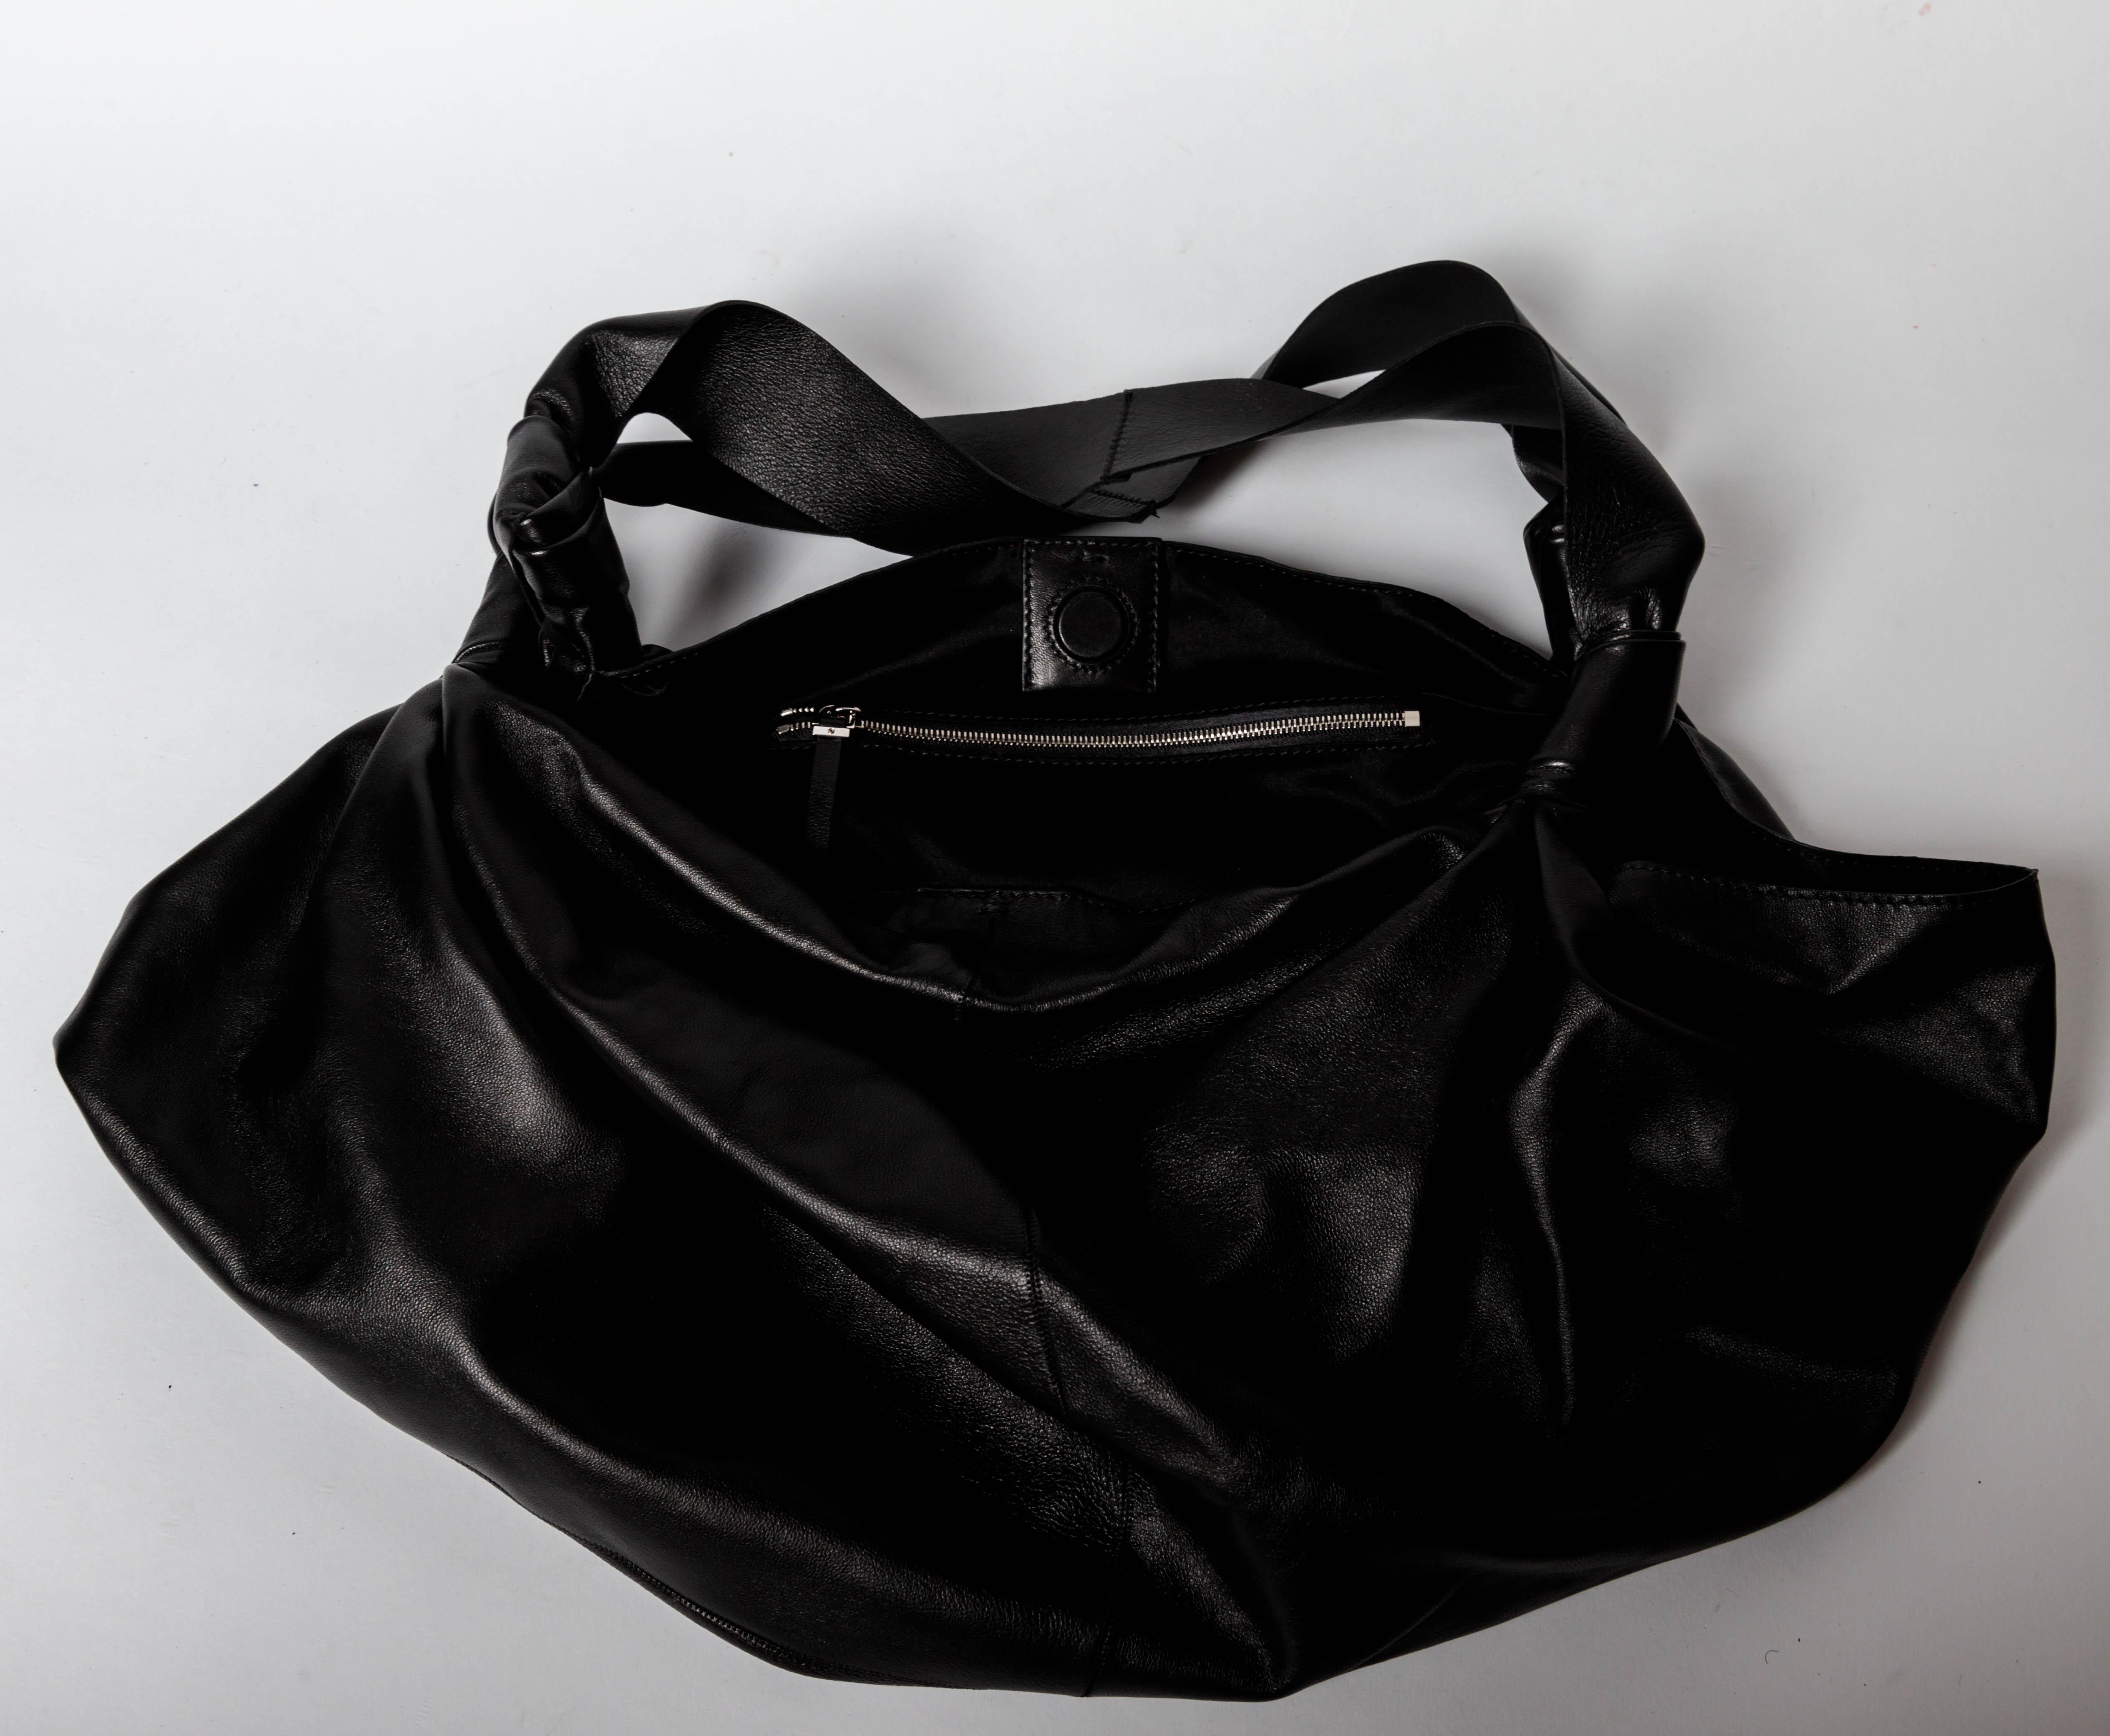 The Row Leather Ascot Bag in Medium In Excellent Condition For Sale In Westhampton Beach, NY